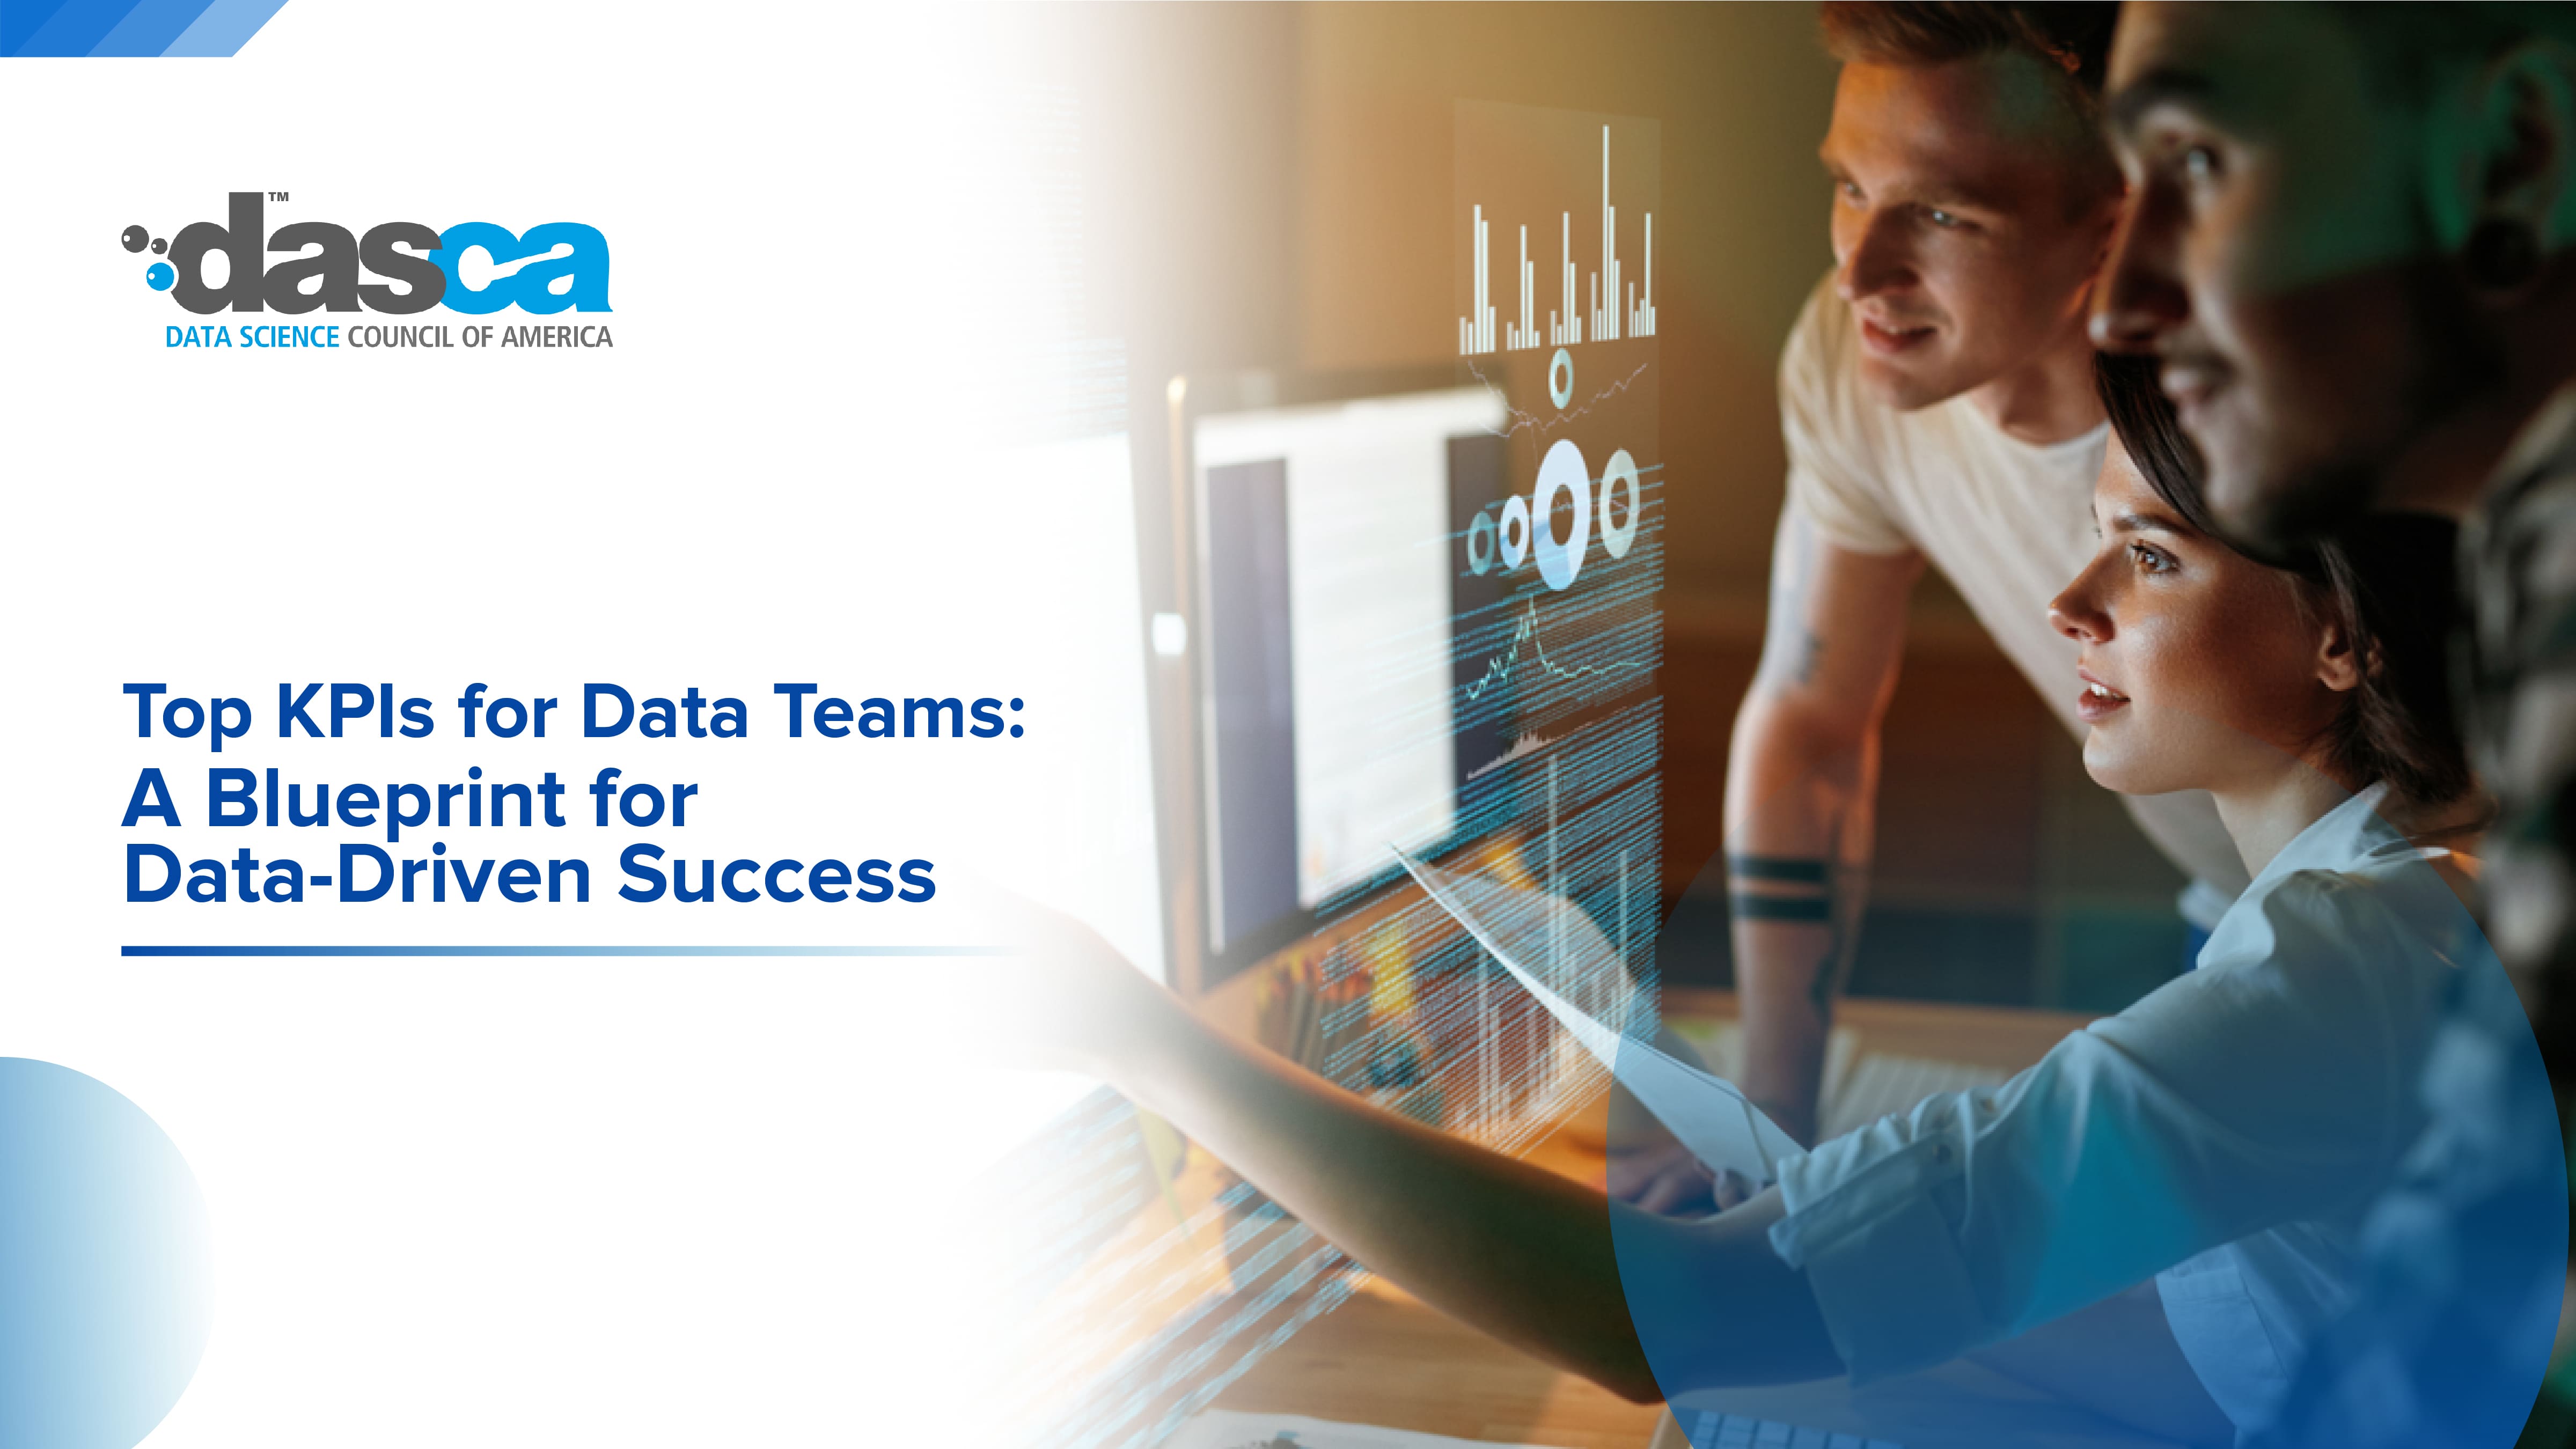 DASCA guide on Top KPIs for Data Teams: A Blueprint for Data-Driven Success